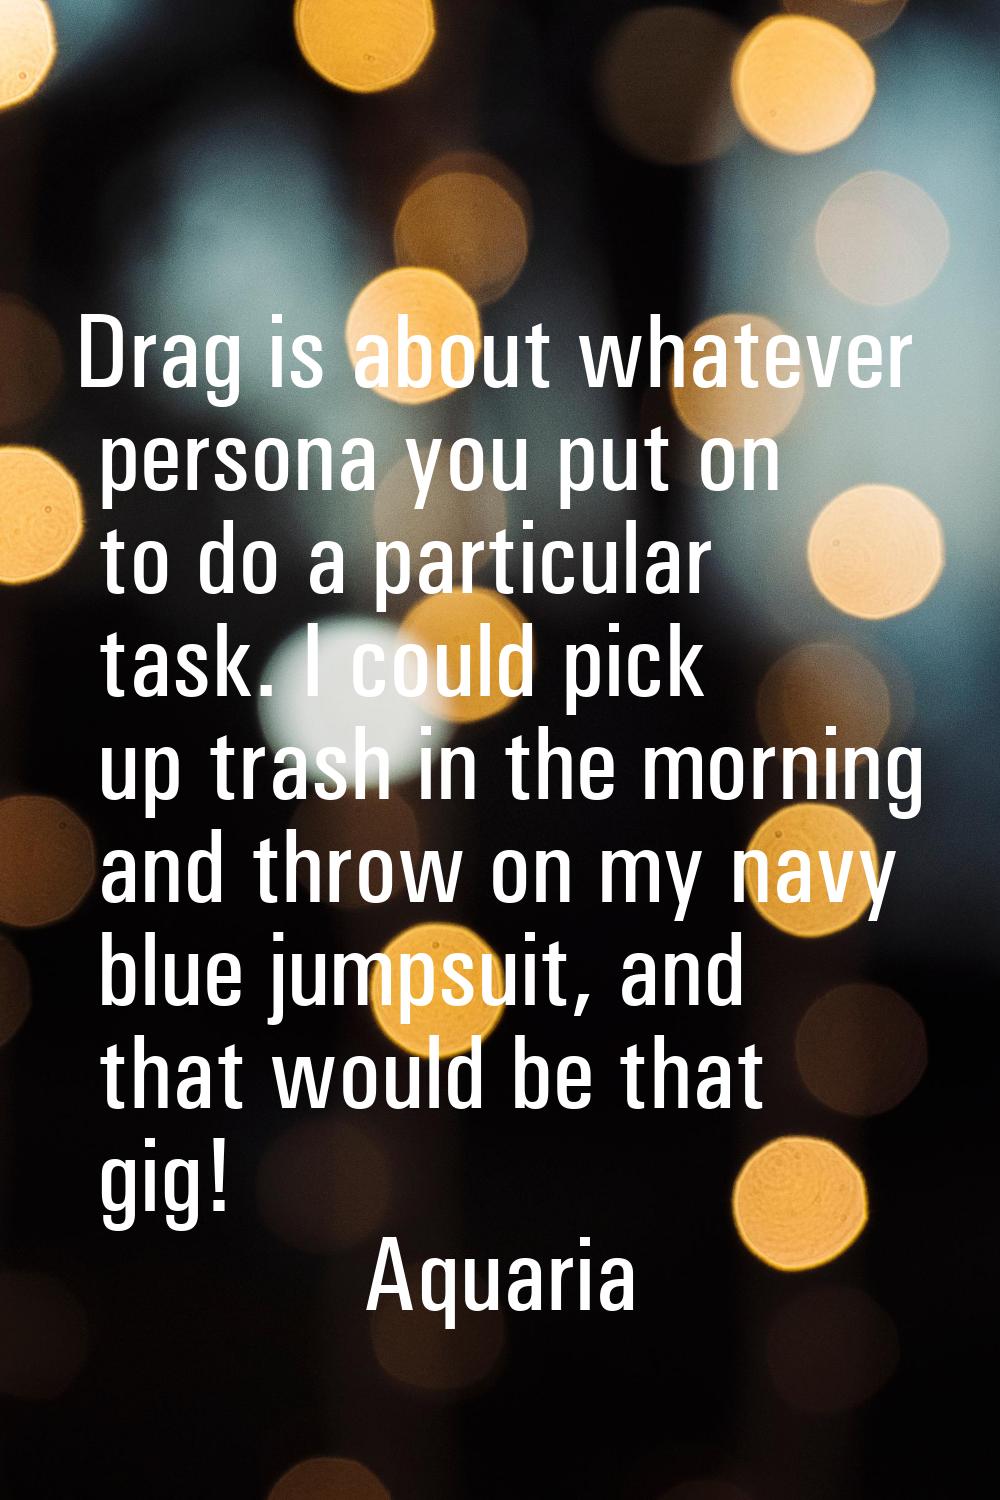 Drag is about whatever persona you put on to do a particular task. I could pick up trash in the mor